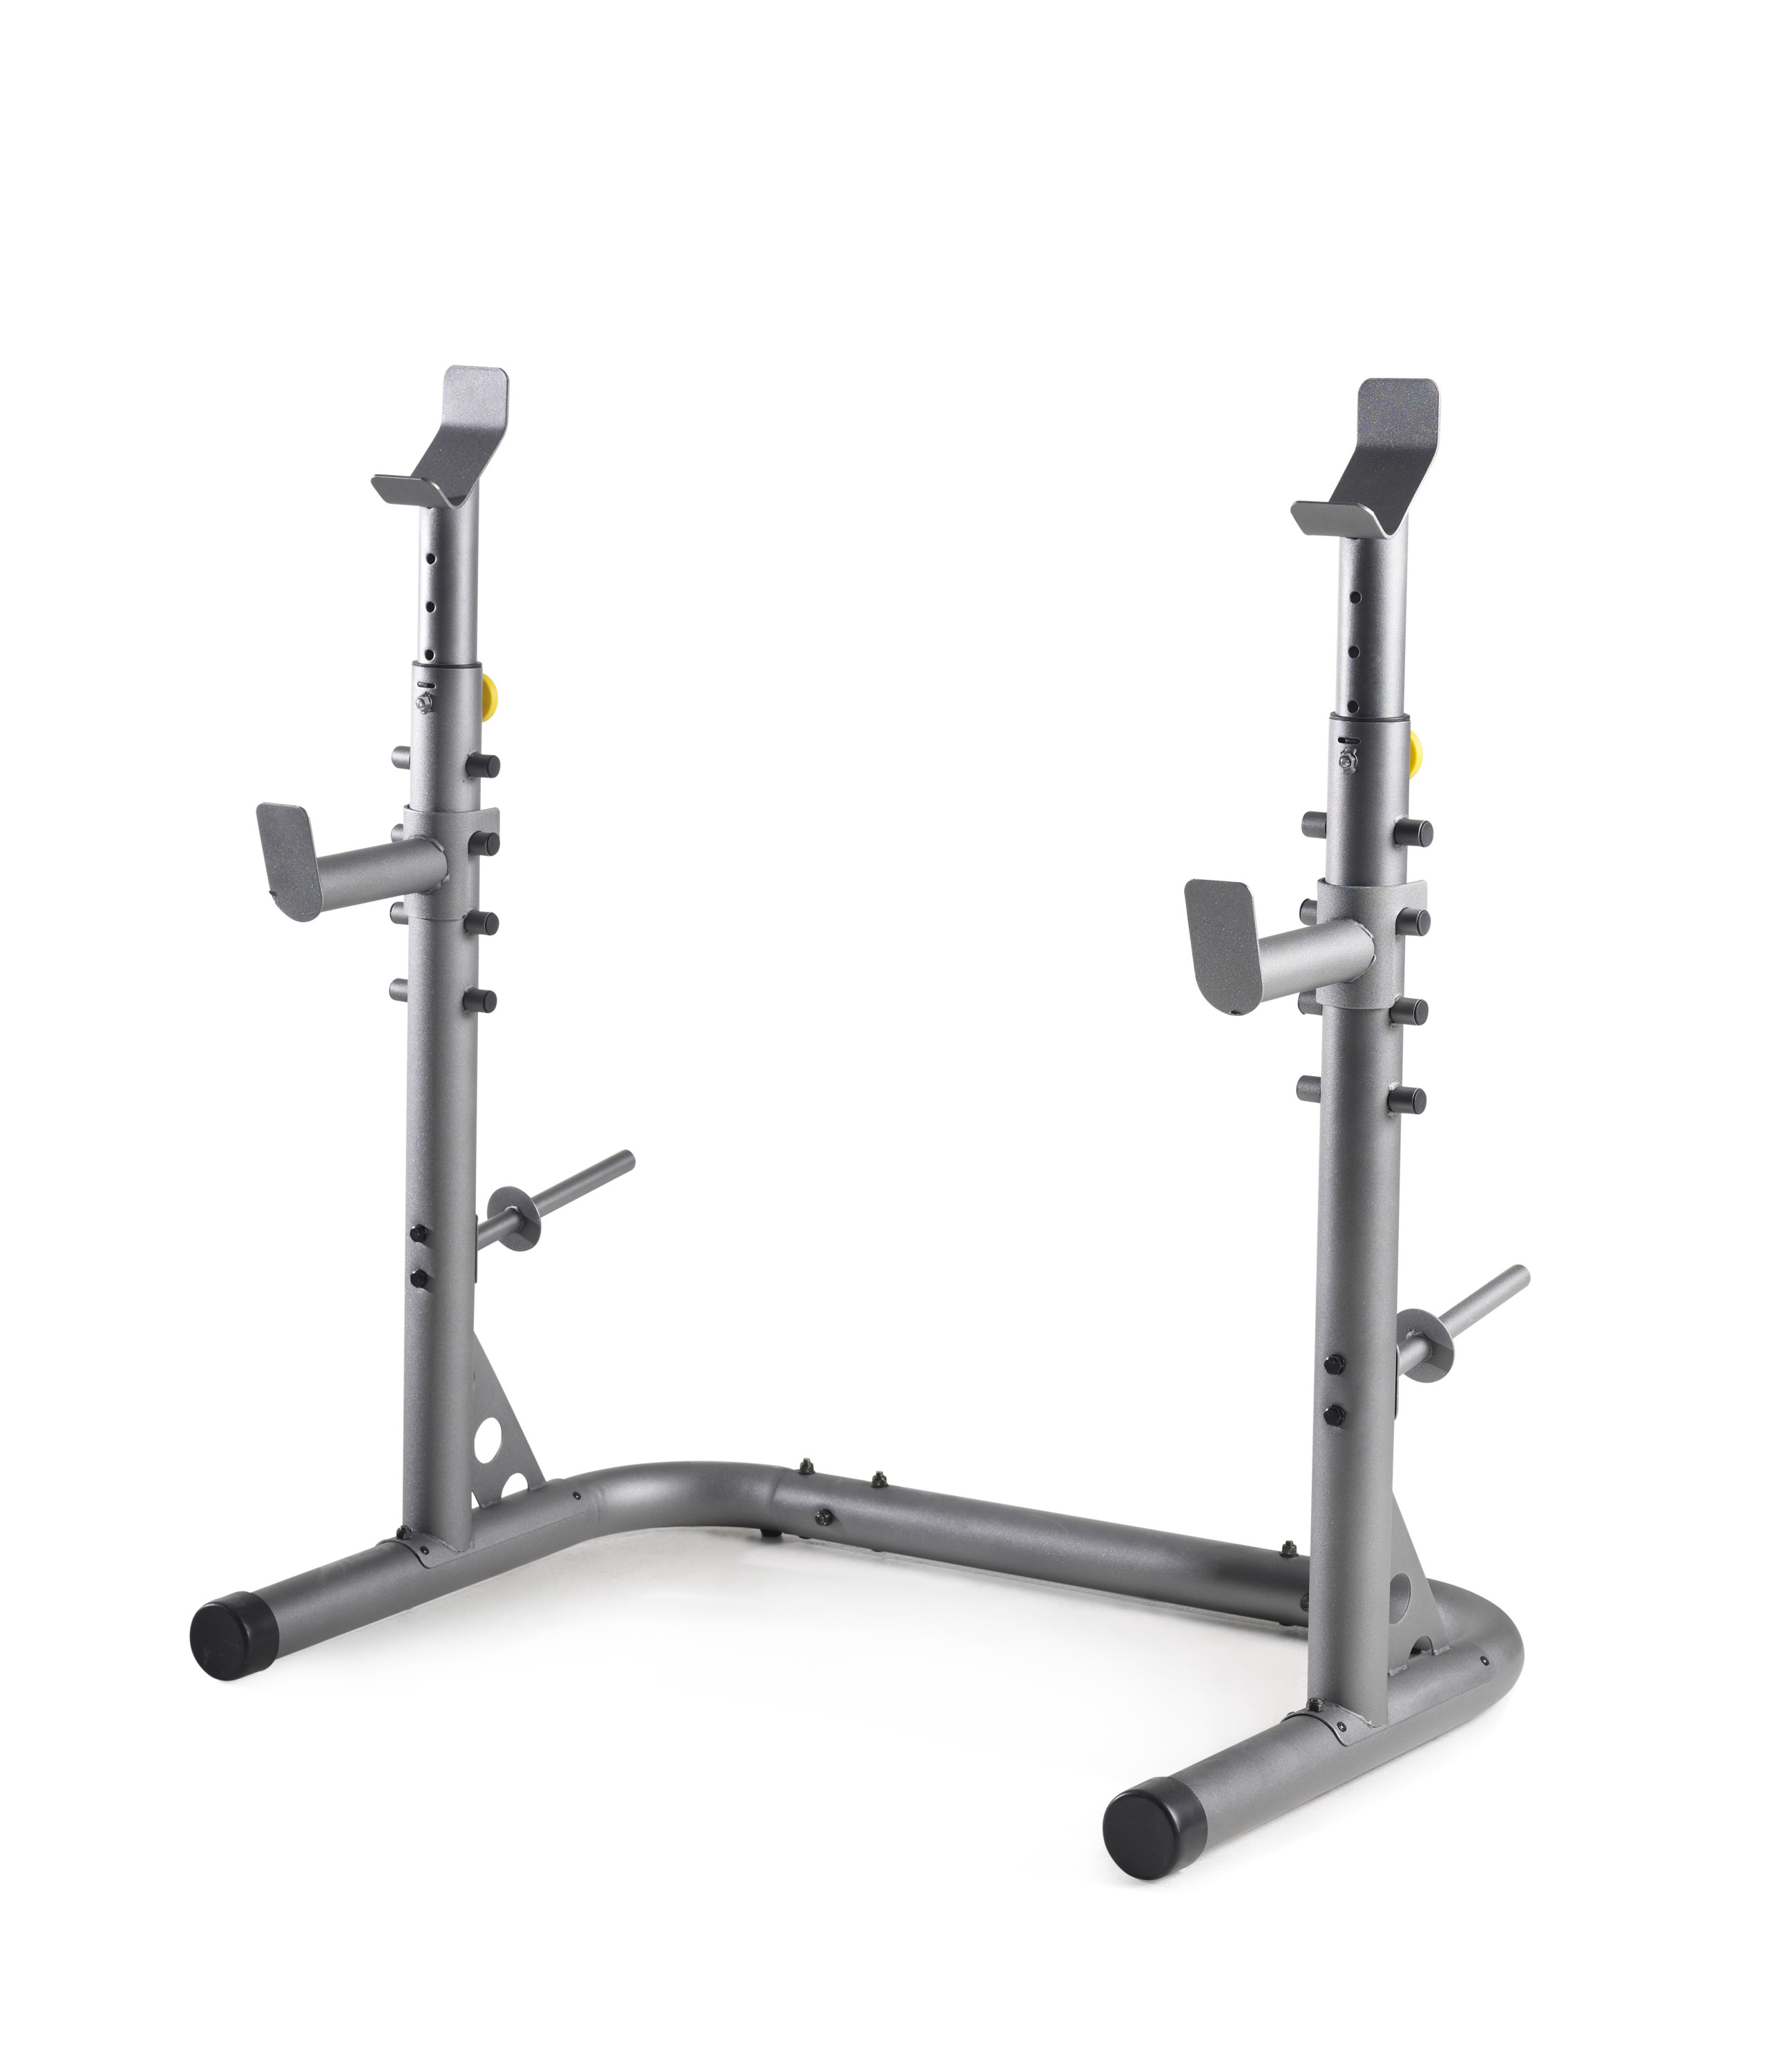 Weider XRS 20 Olympic Squat Rack with 300 Lb. Weight Limit - image 4 of 11